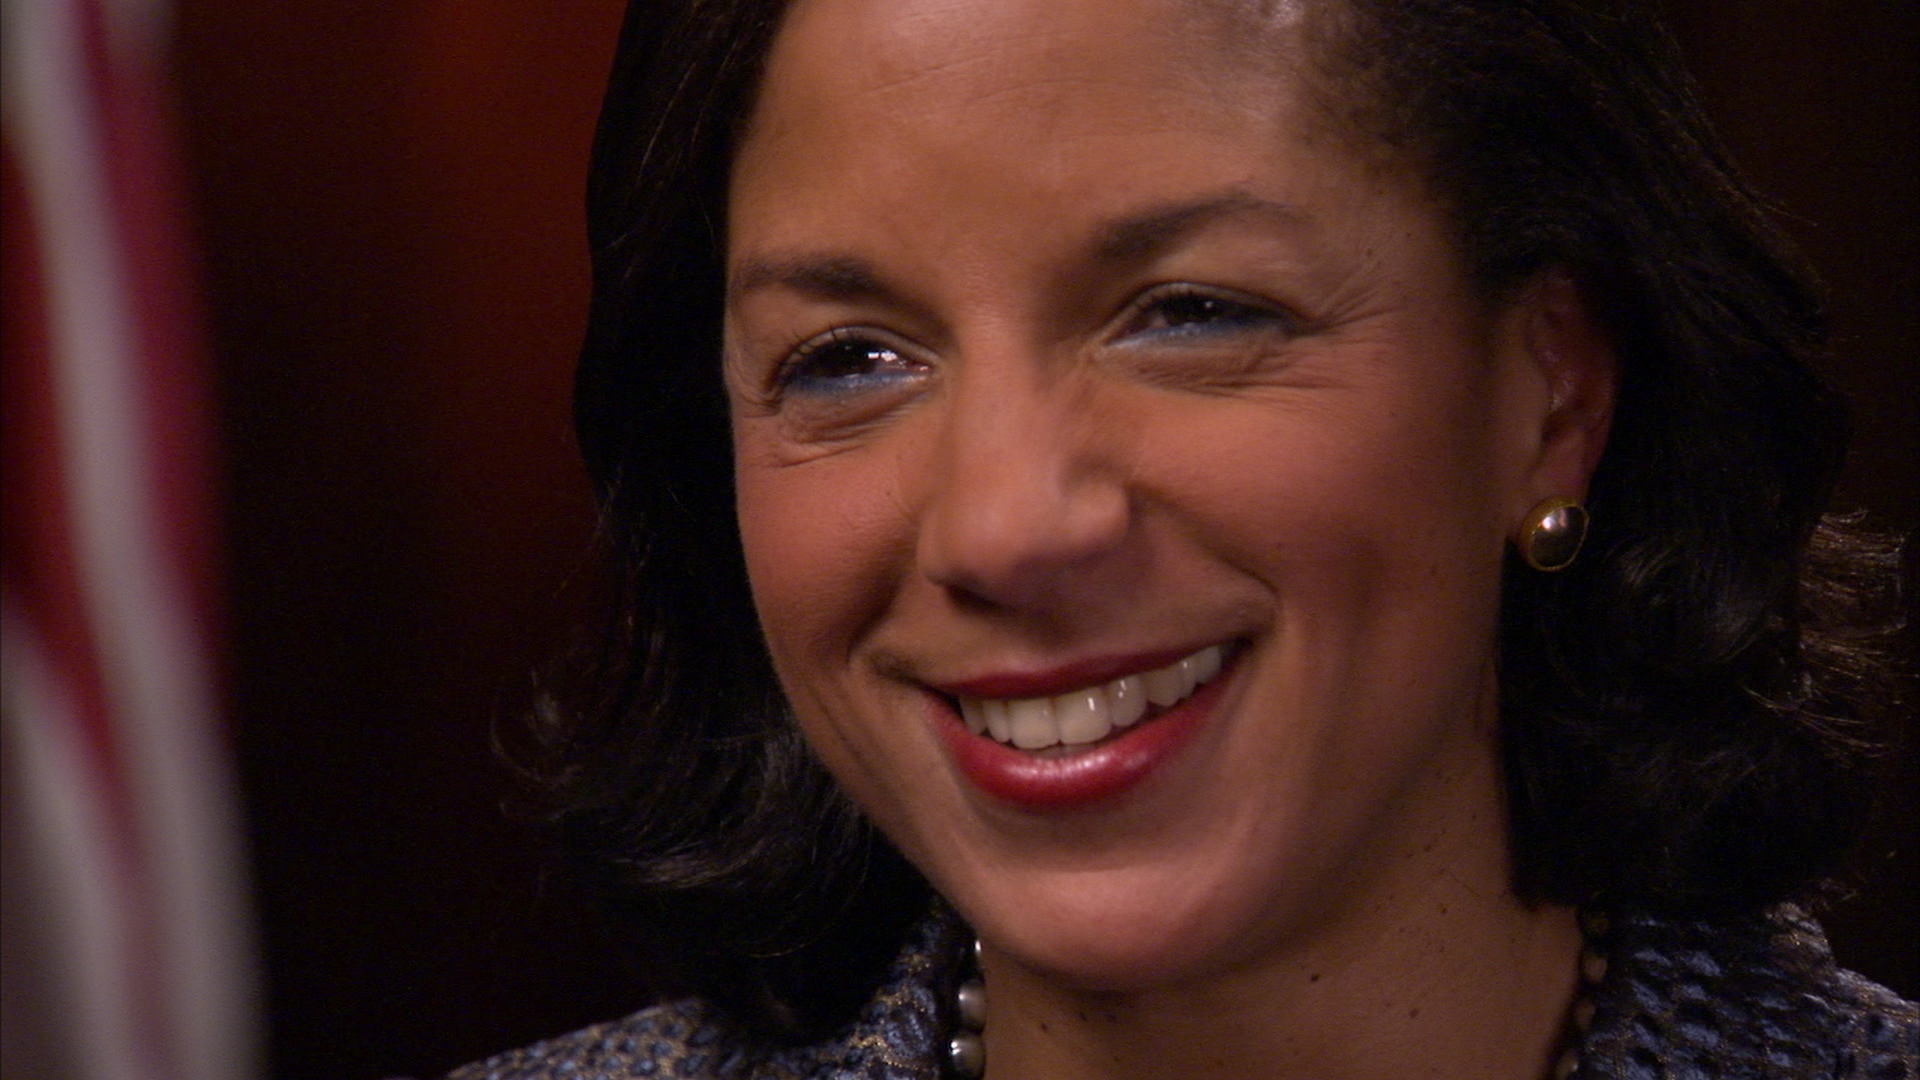 Susan Rice on contending with crisis - CBS News